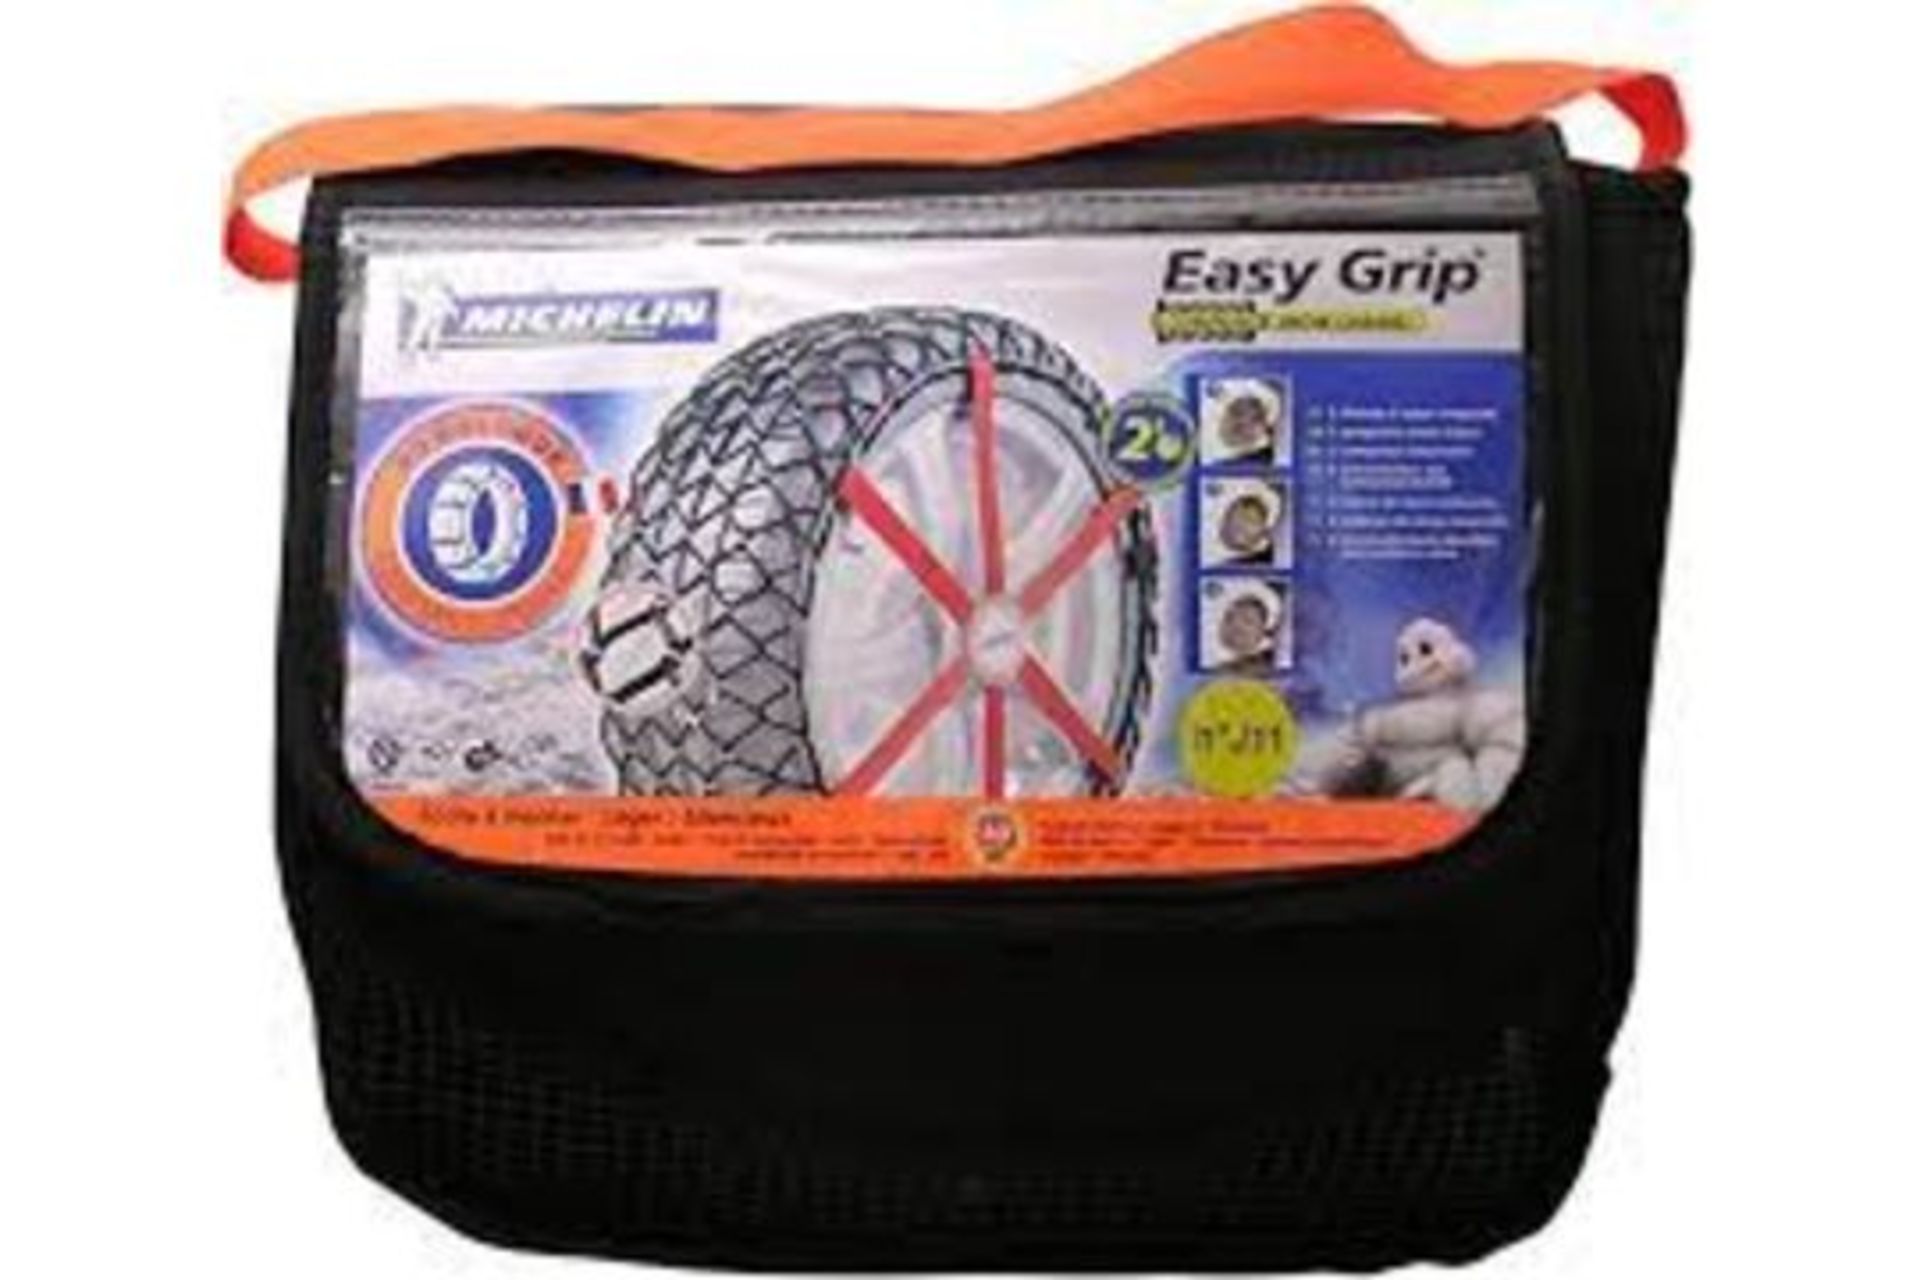 5 X NEW PACKAGED SETS OF Michelin Snow Sock Easy Grip K15. RRP £77.95 EACH. Item description The